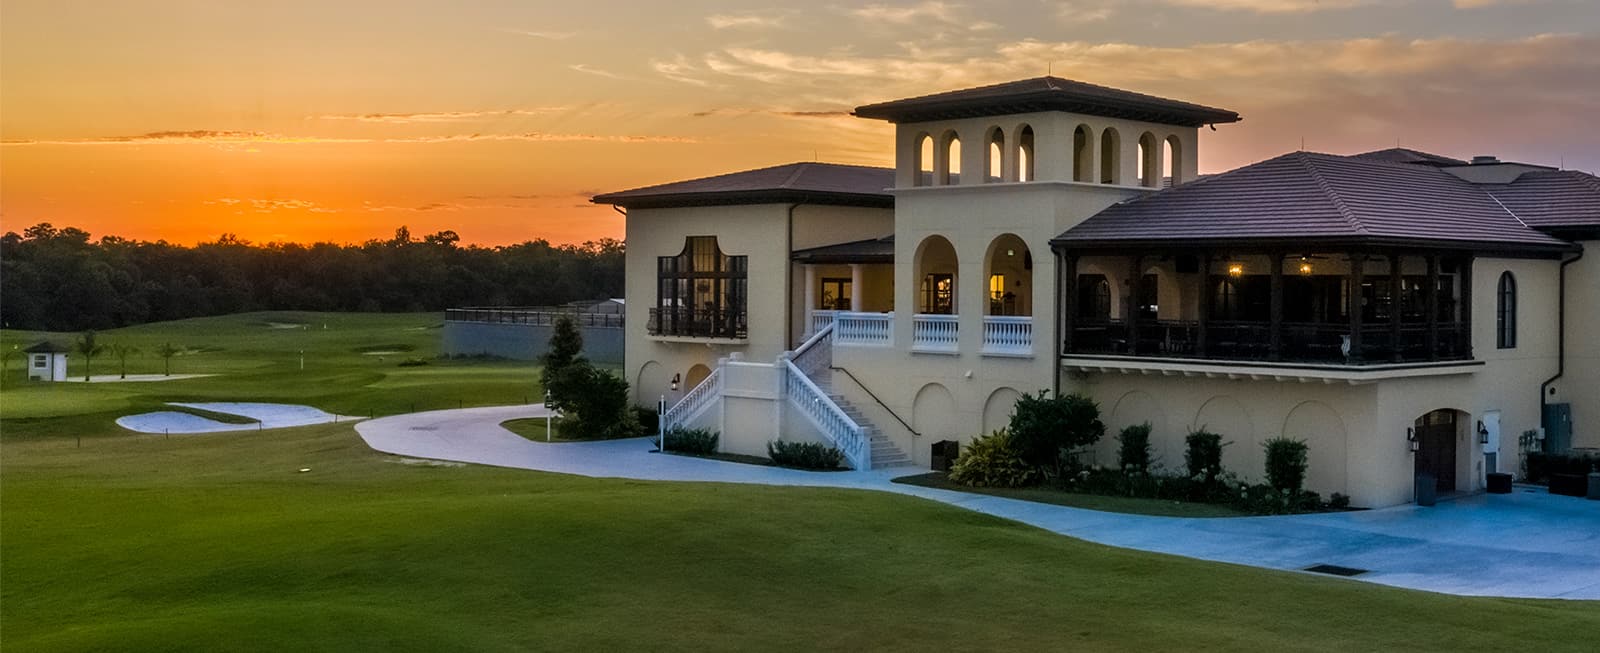 Sunset view of the Jack Nicklaus golf course and clubhouse at The Bear’s Den Resort Orlando.